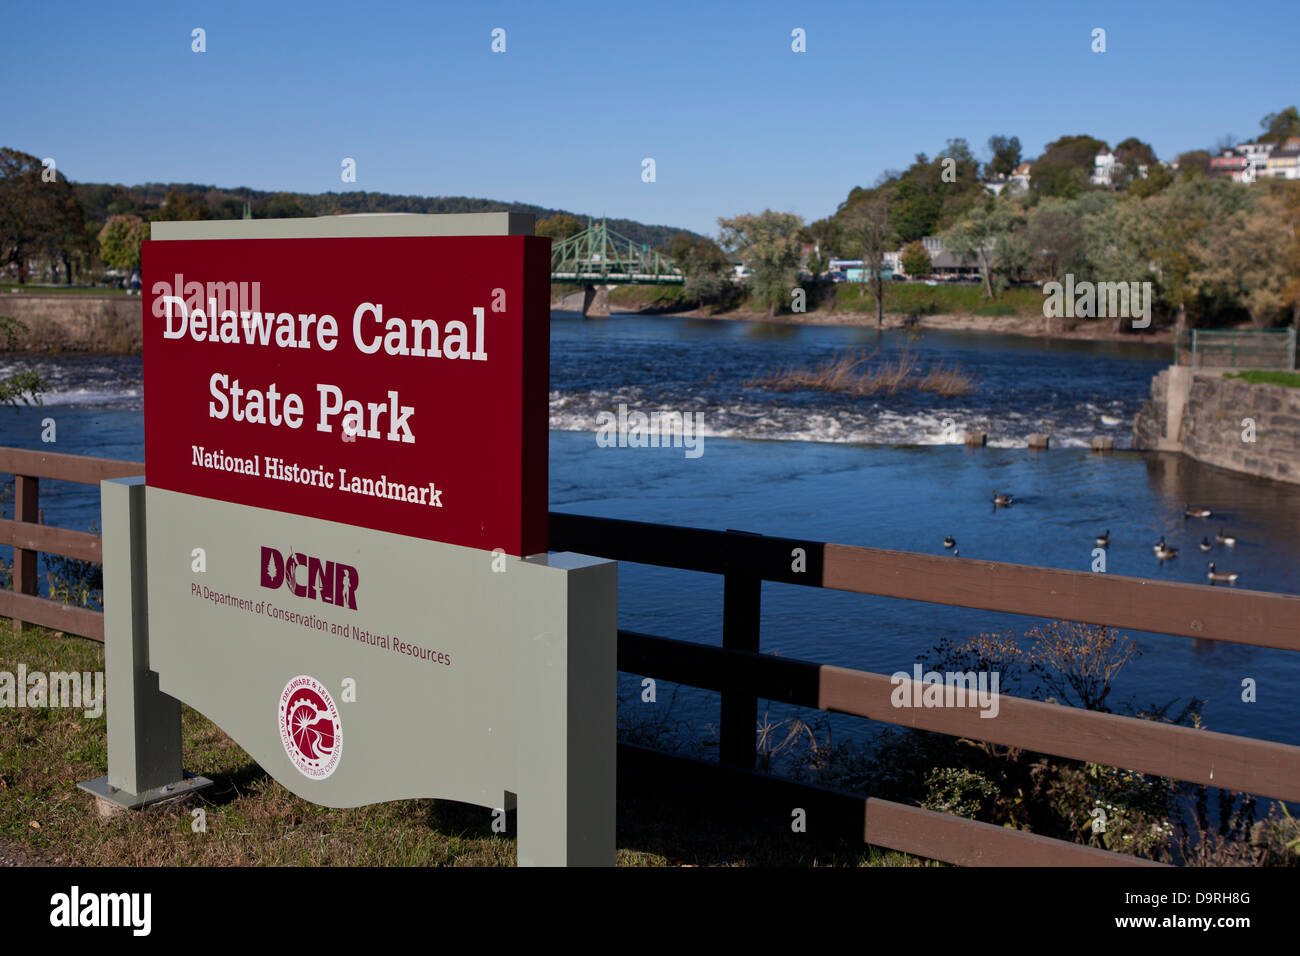 Delaware Canal State Park sign, Lumberville, Bucks County, Pennsylvania, United States of America Stock Photo